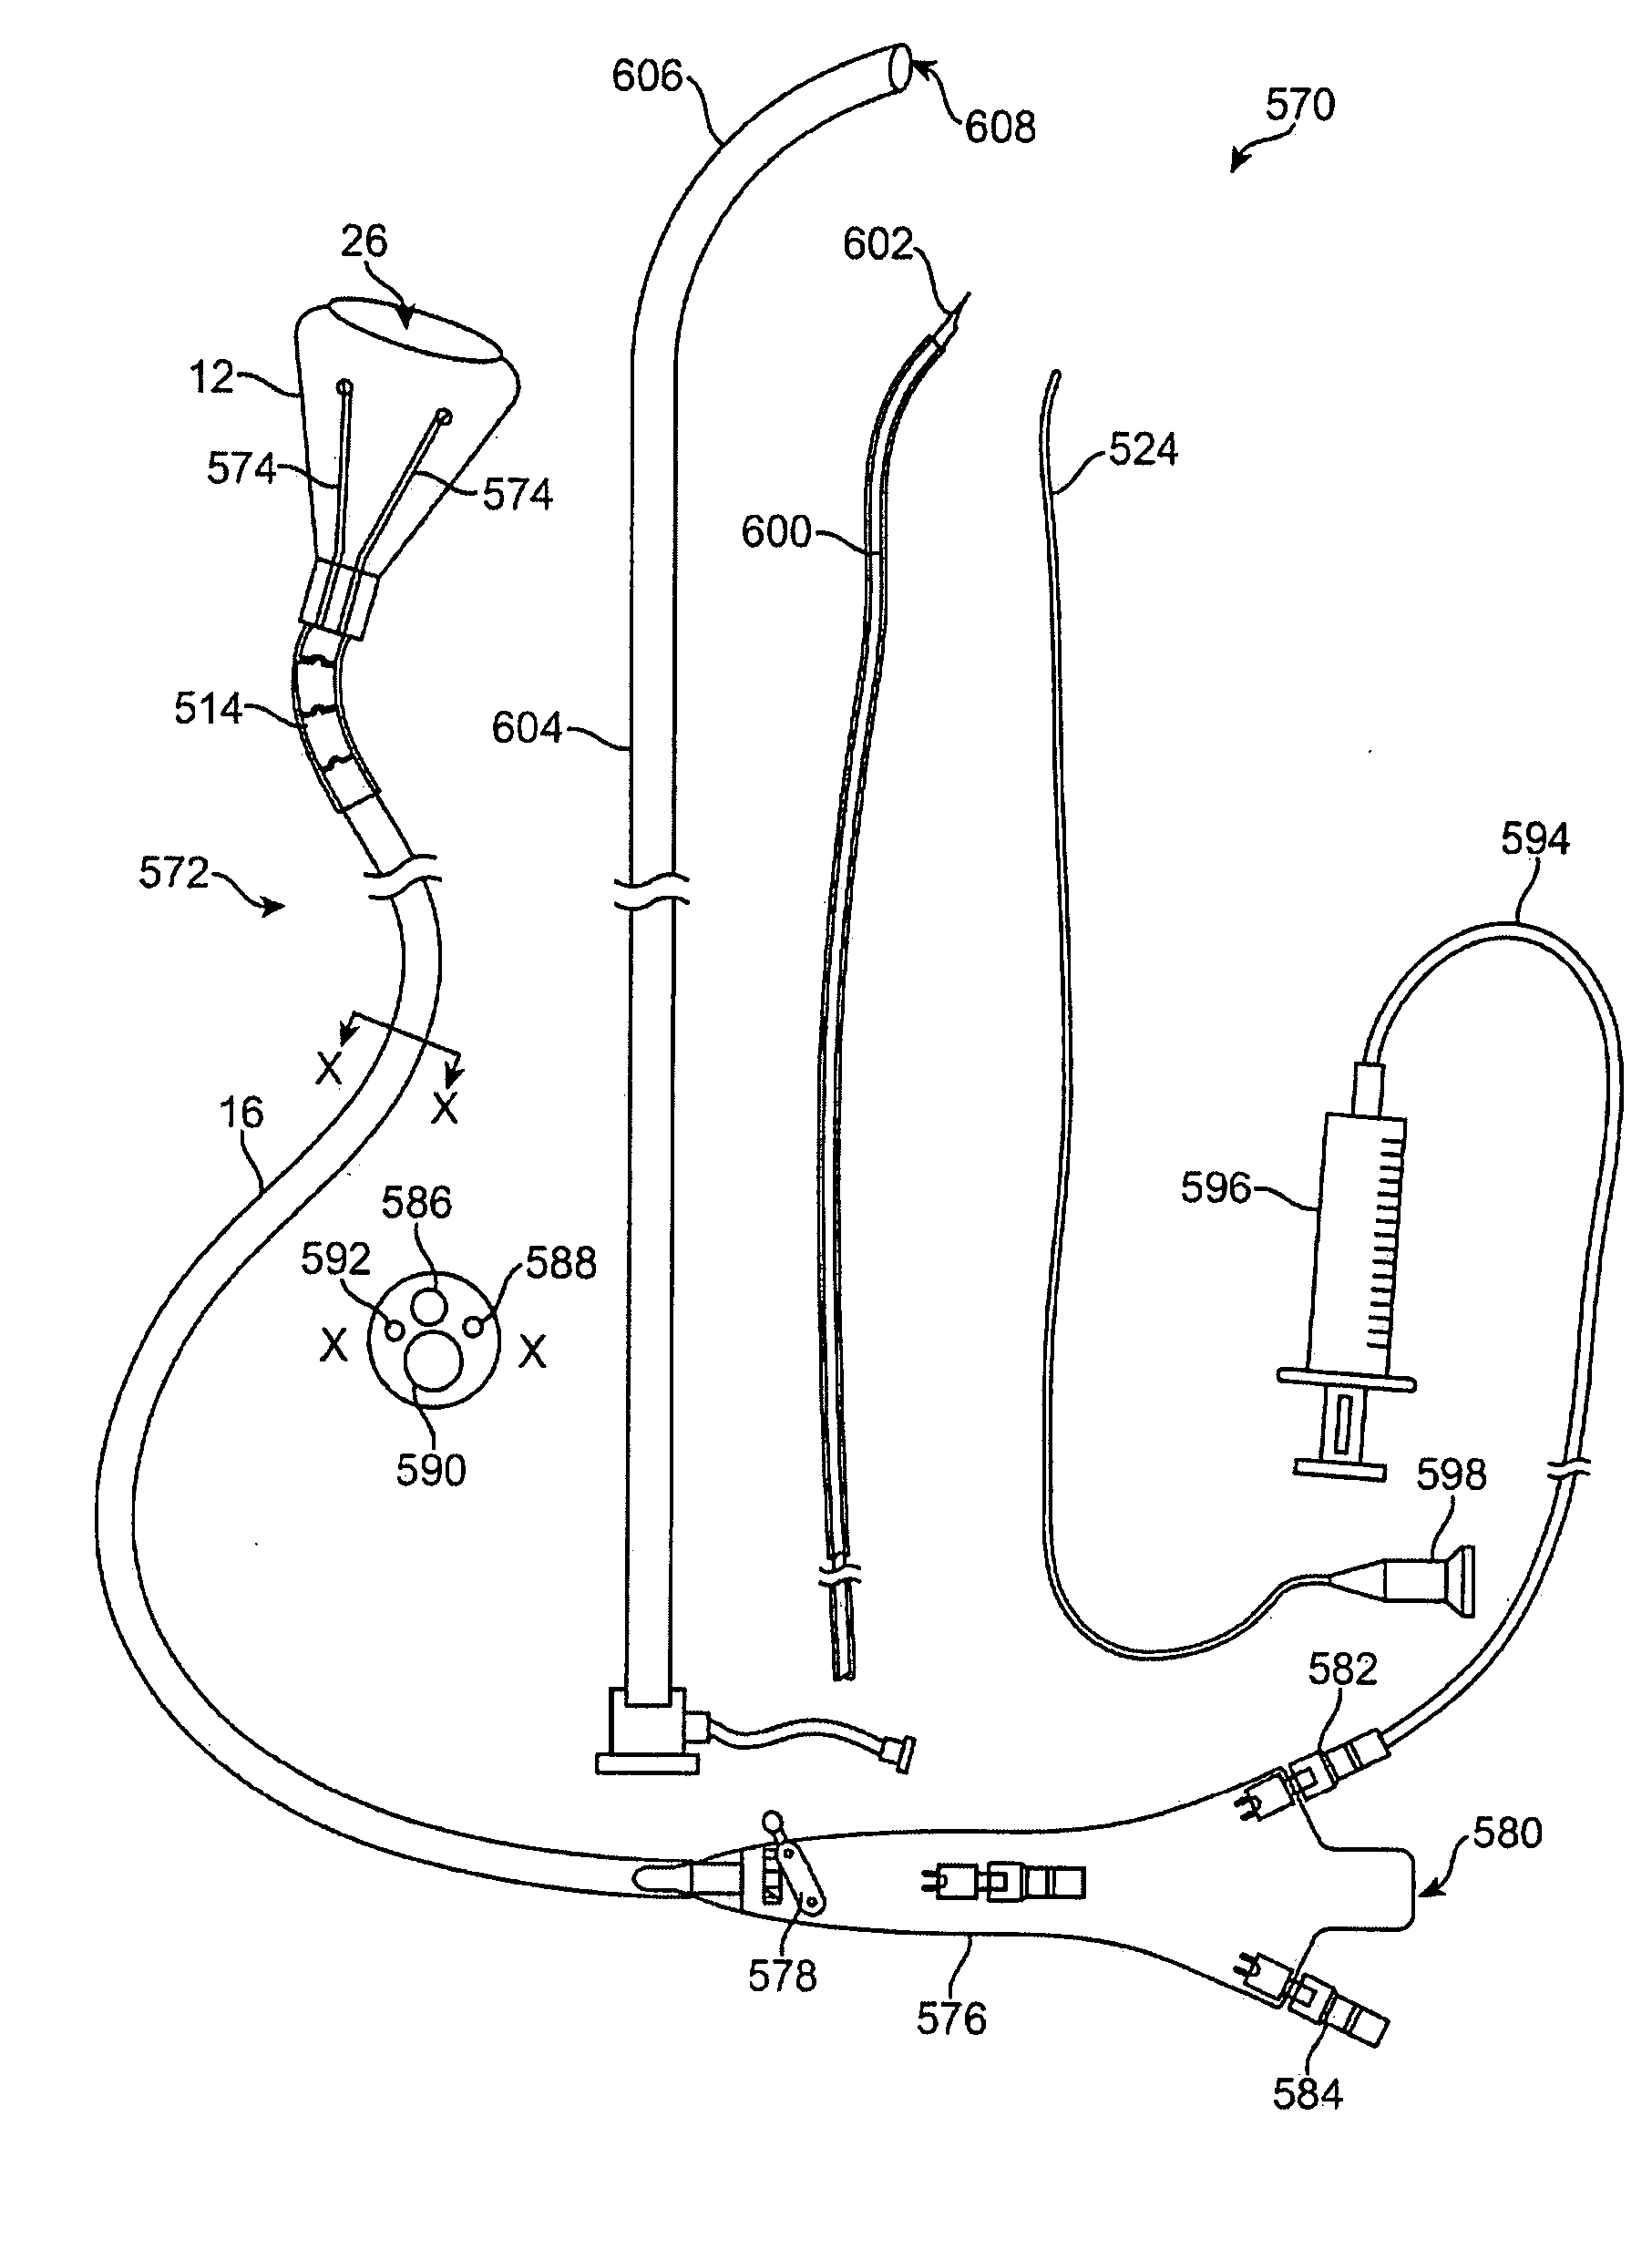 Visualization apparatus for transseptal access